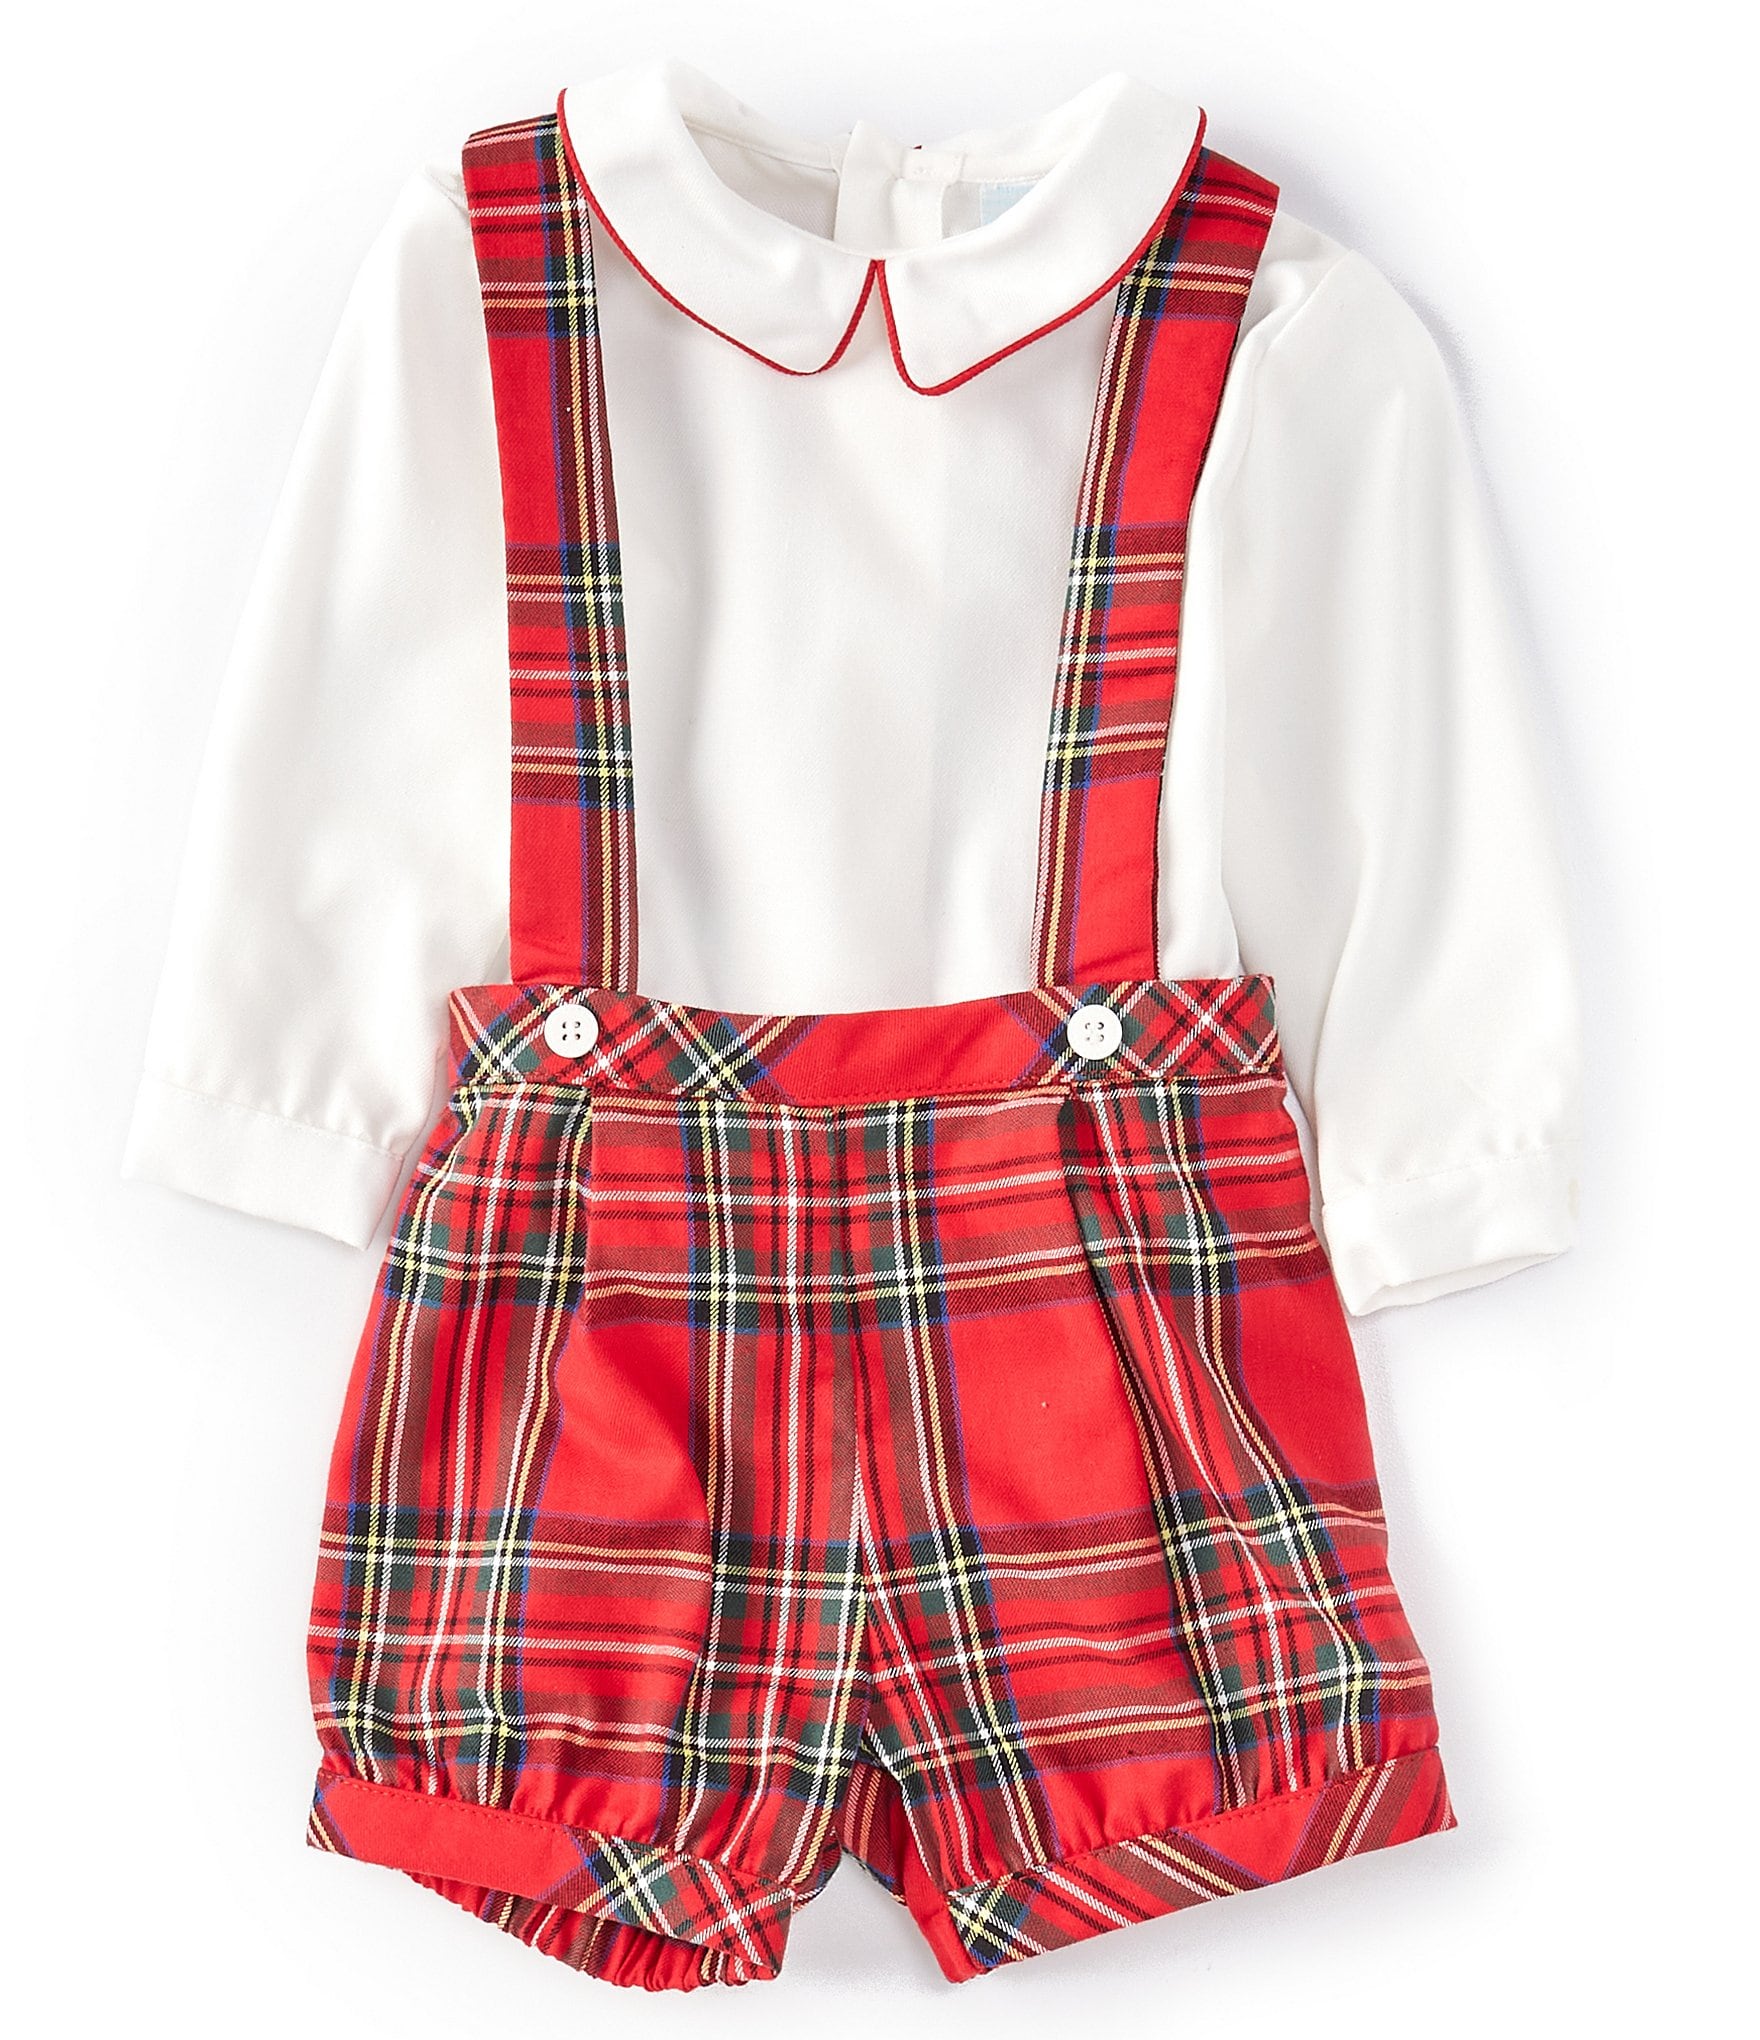 christmas clothing: Baby Boy Outfits & Clothing Sets | Dillard's